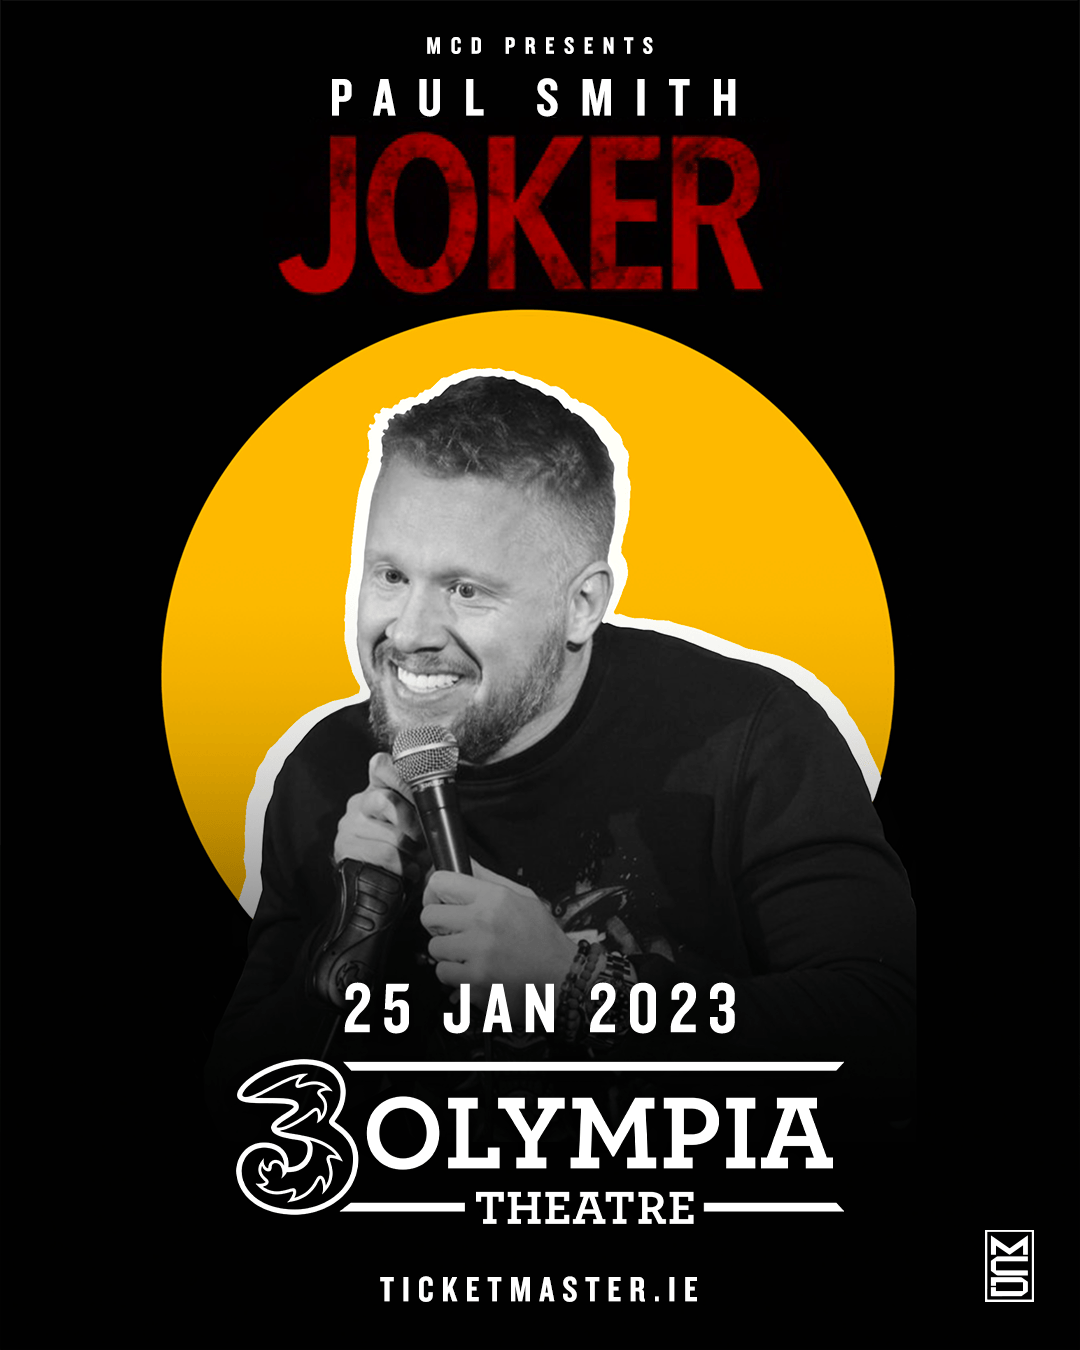 PAUL SMITH  BRAND NEW SHOW - JOKER  3OLYMPIA THEATRE DATE CONFIRMED